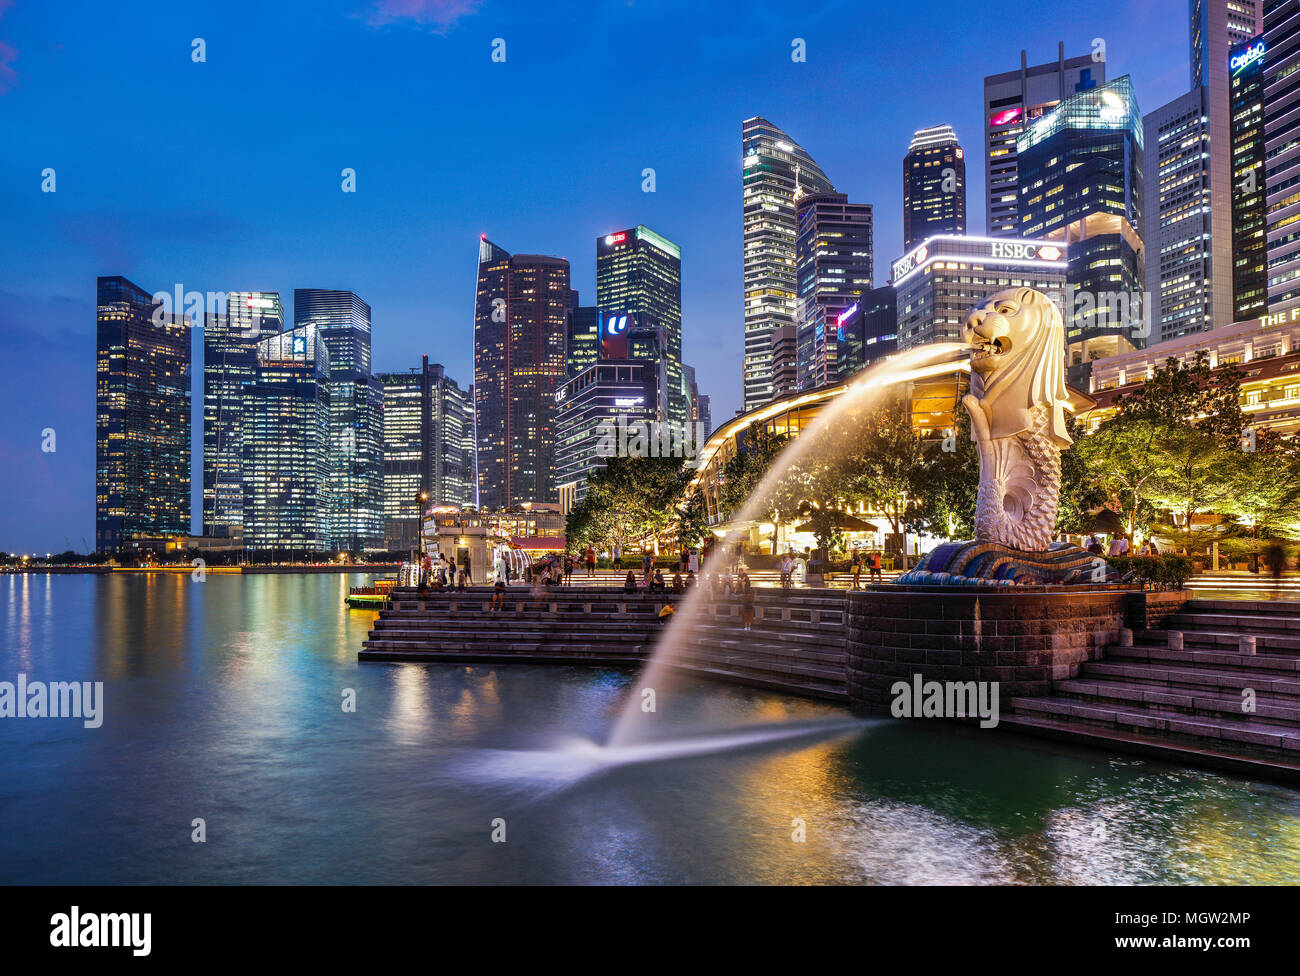 The statue of the Merlion in Merlion Park, Singapore. Stock Photo